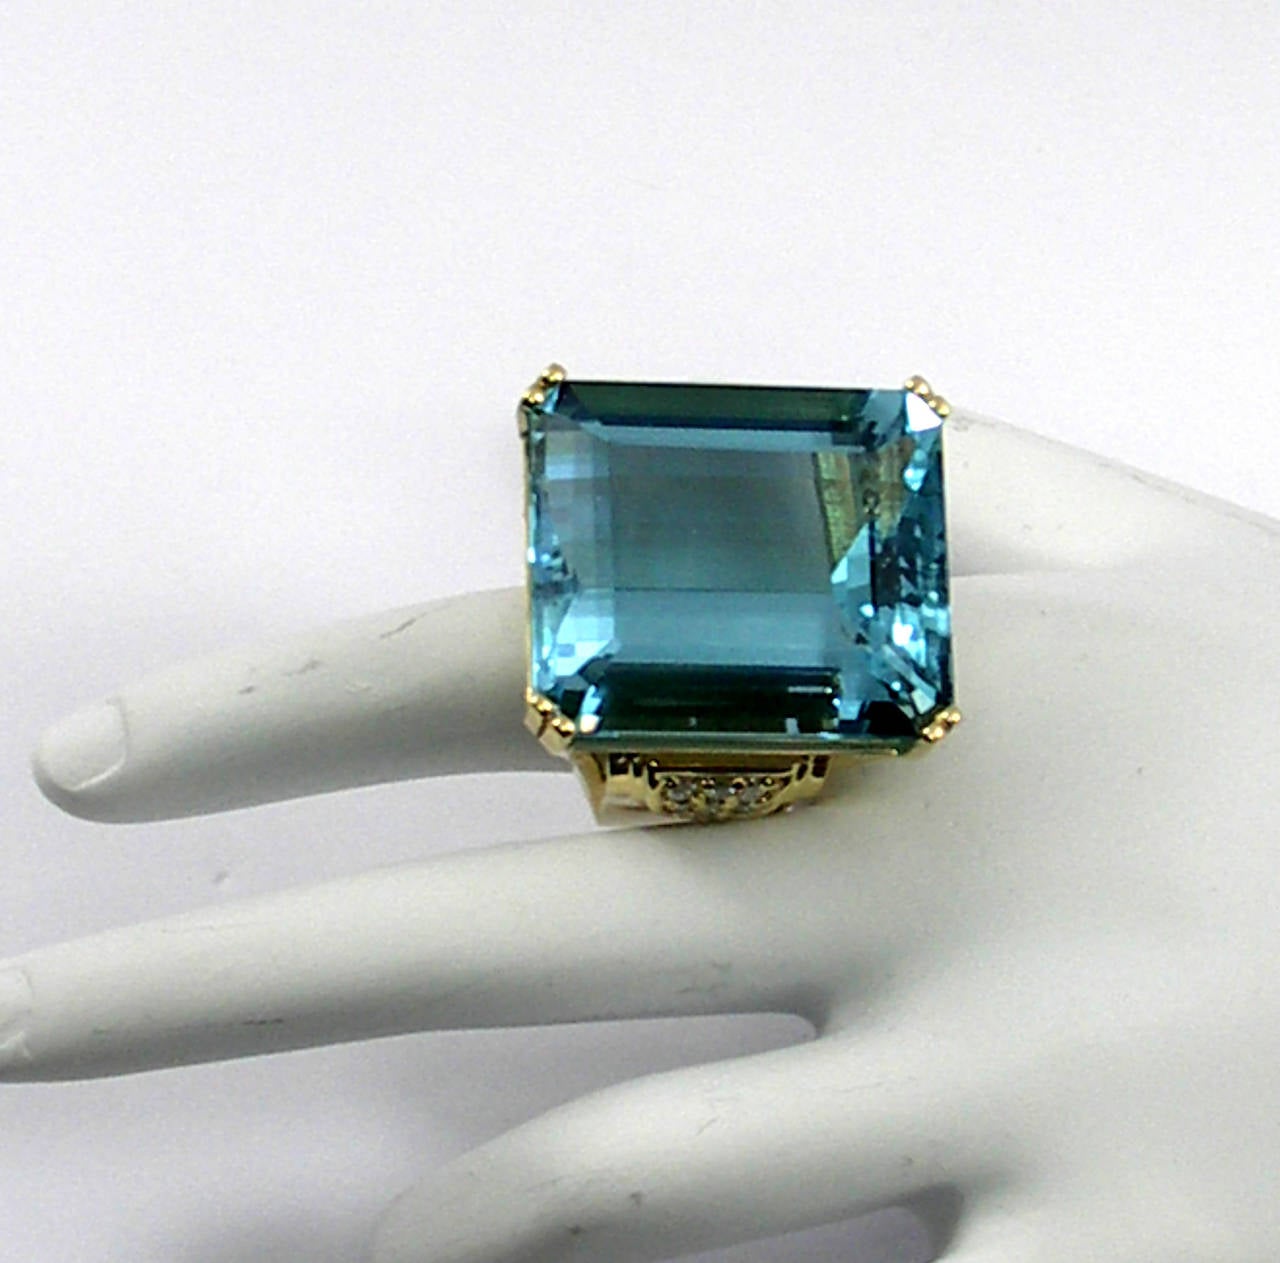 An amazing aquamarine weighing 62.88ct, set in a signature style ring. This ring features 18K yellow gold construction, and stylish design. The front and back of the ring are each set with 15 round brilliant cut diamonds, while each shoulder is set